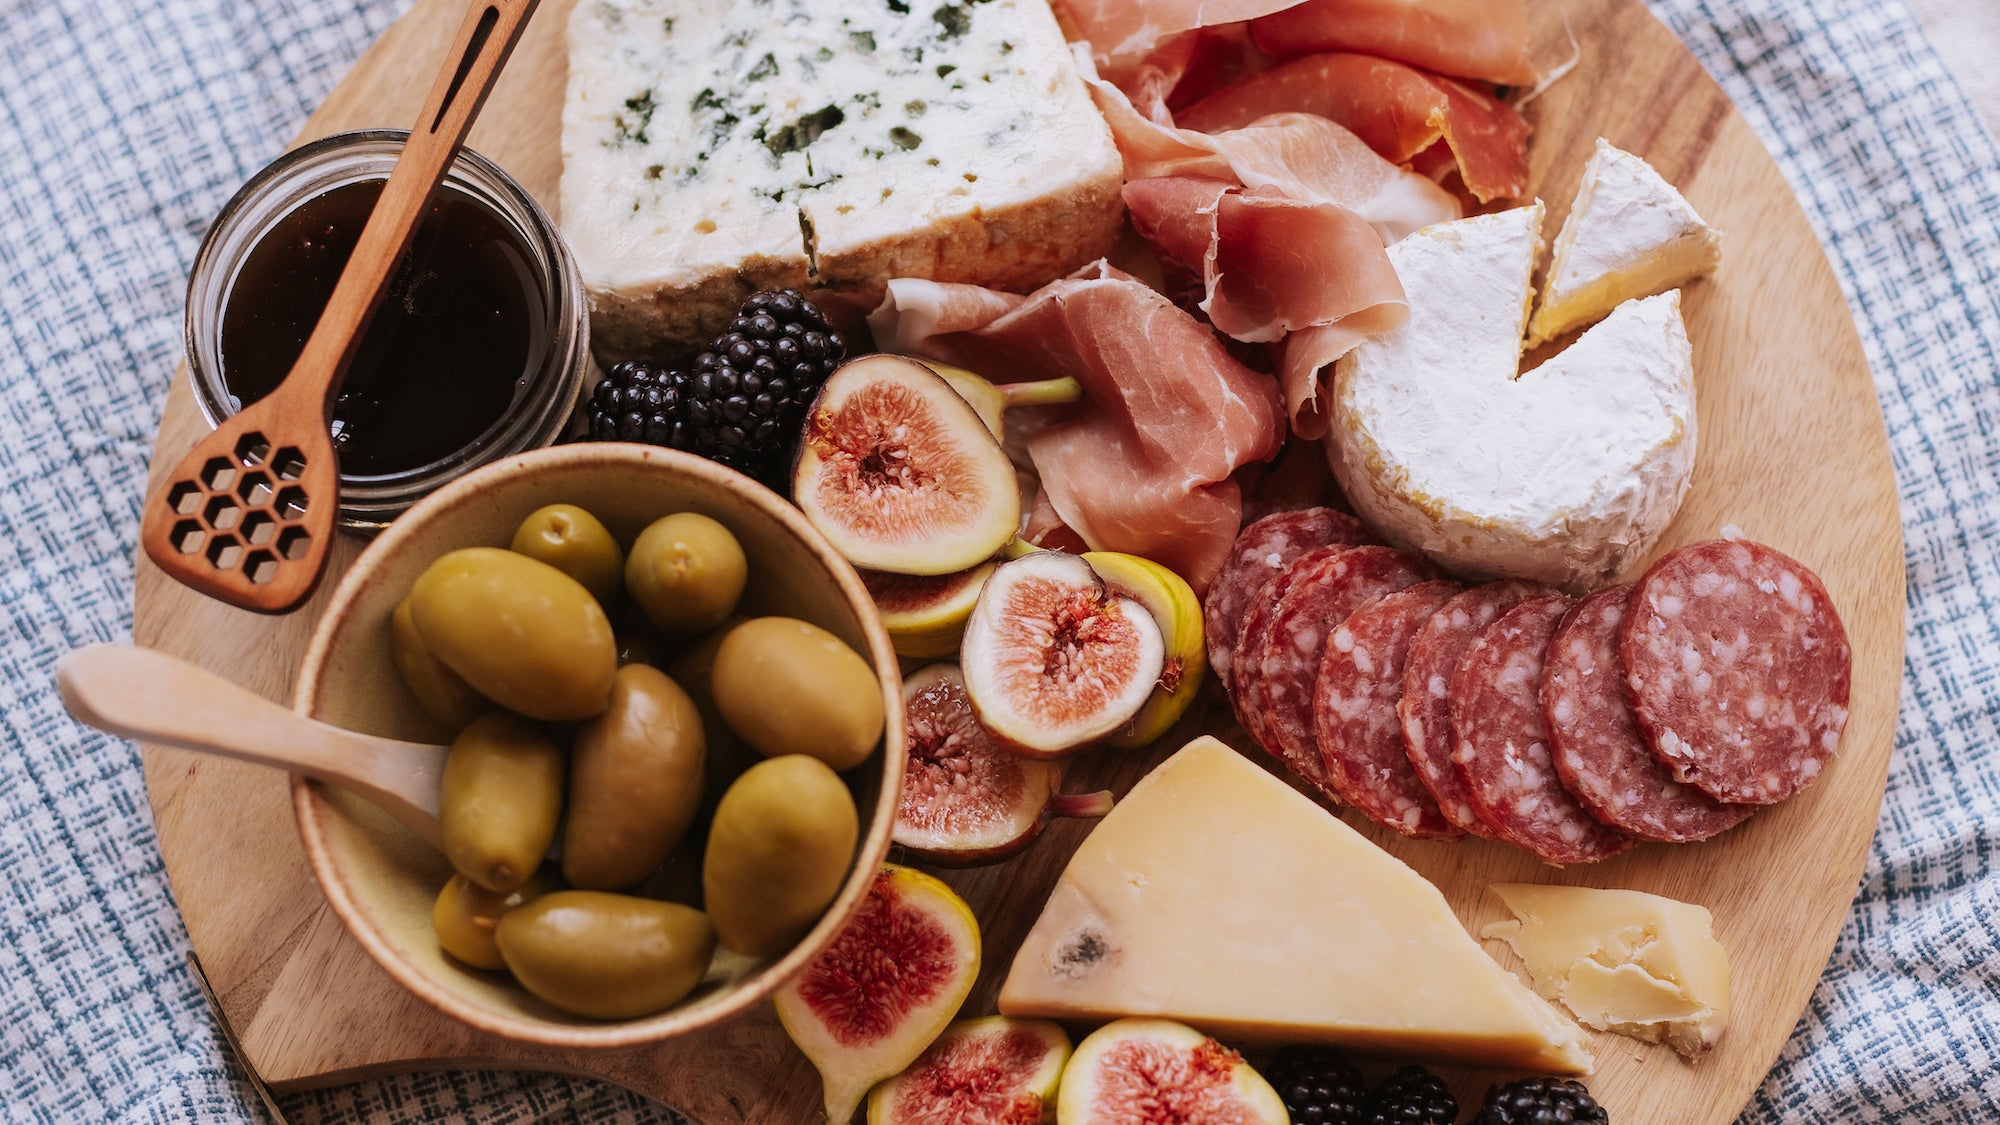 charcuterie board with dark honey, figs, olives, salami and cheese